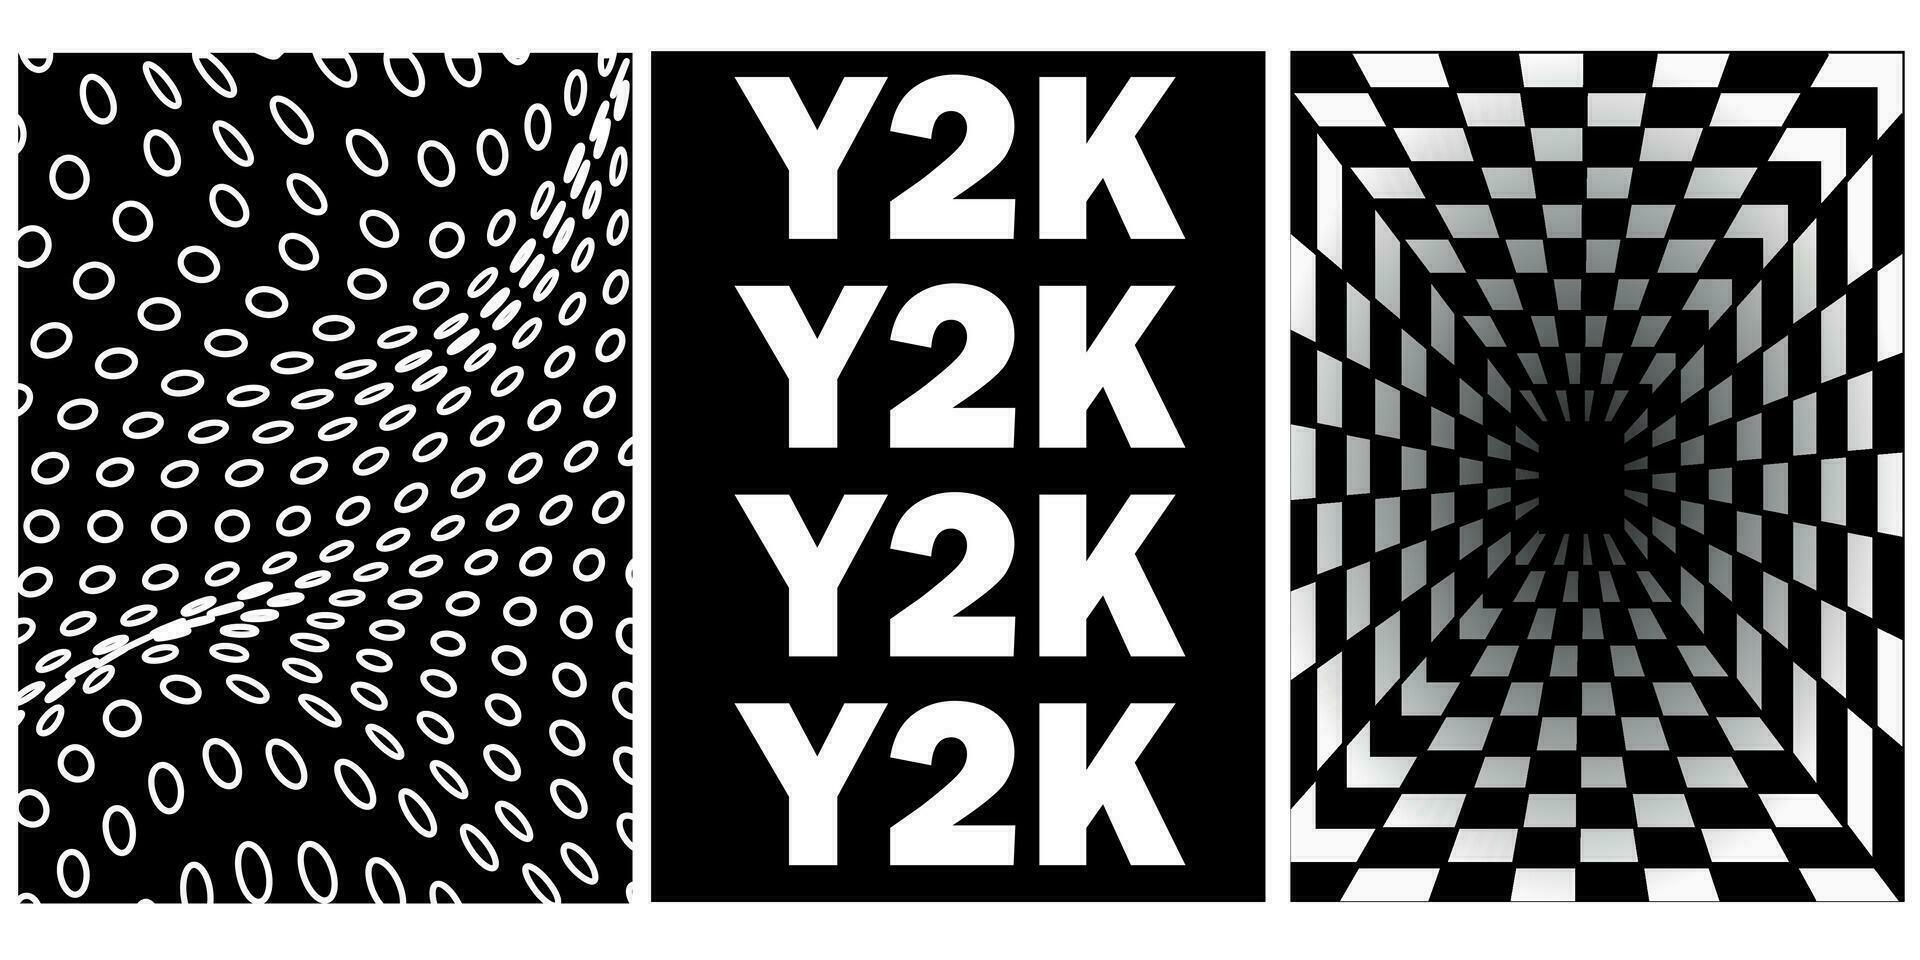 Set of abstract aesthetic y2k geometric elements and 3D wireframe shapes. Black and white retro design elements. Vector illustration for social media or posters.